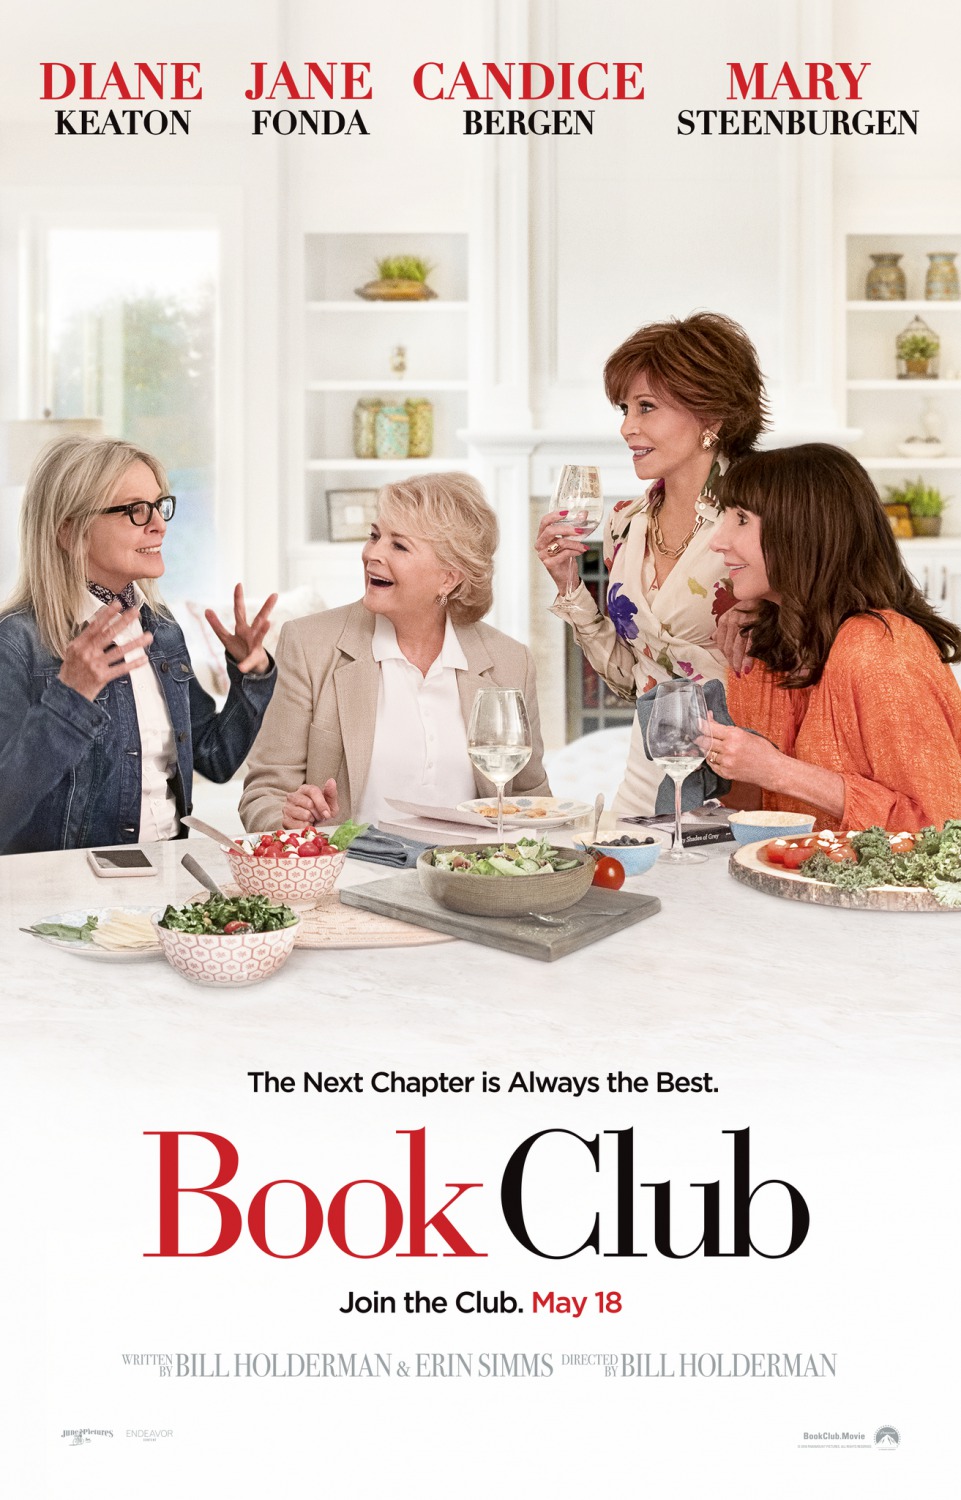 book club movie review nytimes